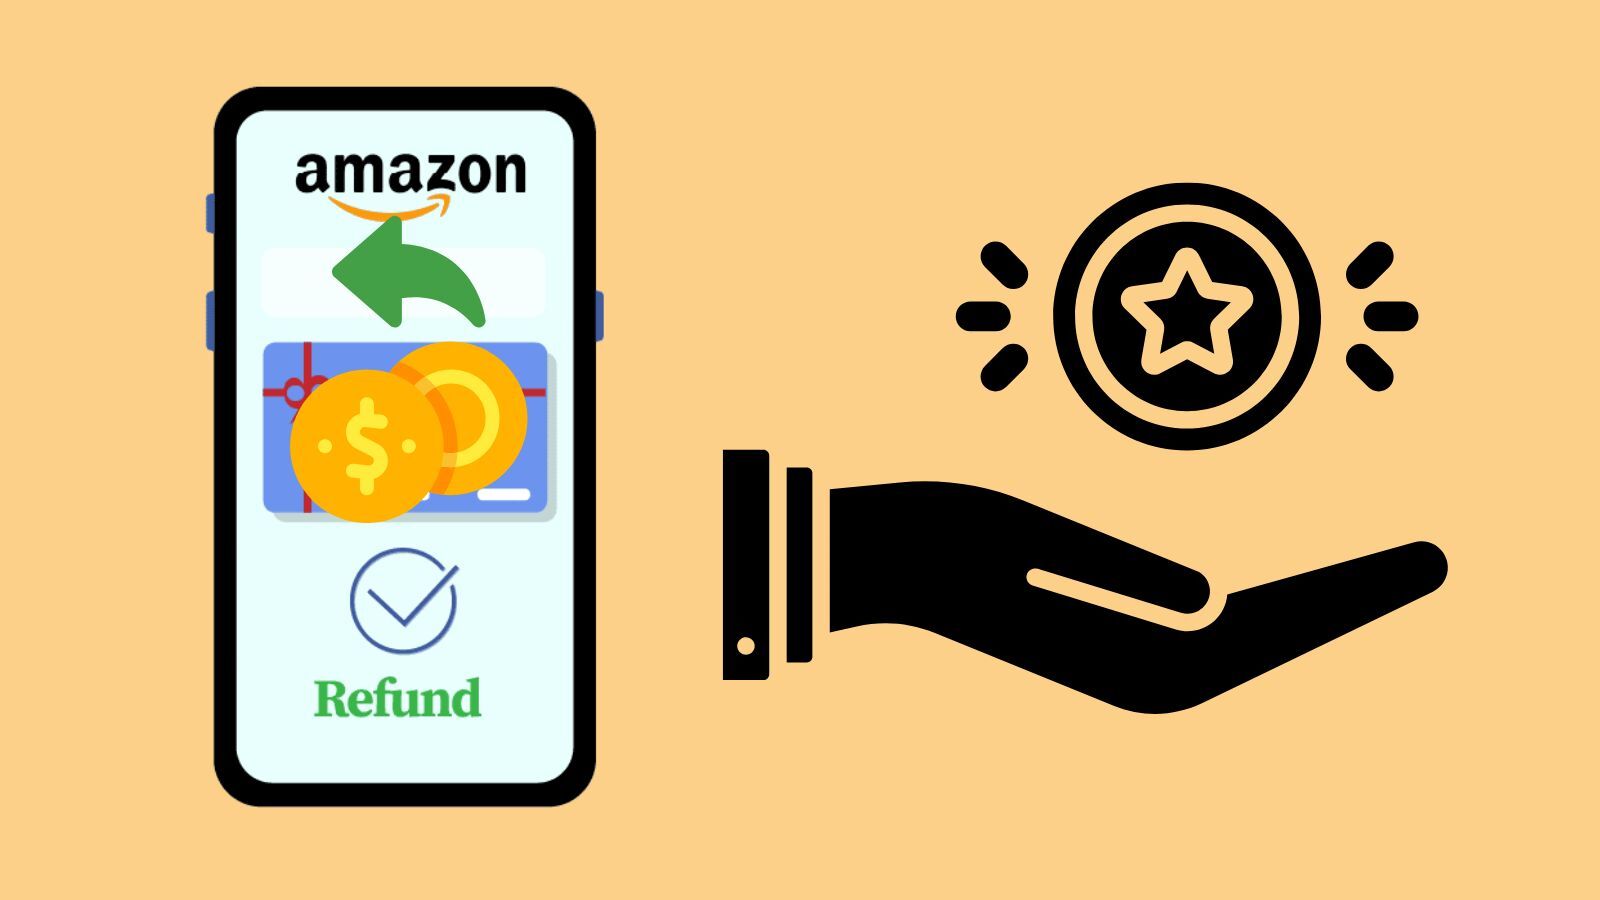 Does Amazon Refund Reward Points? (Yes, Here Is How to Do It)